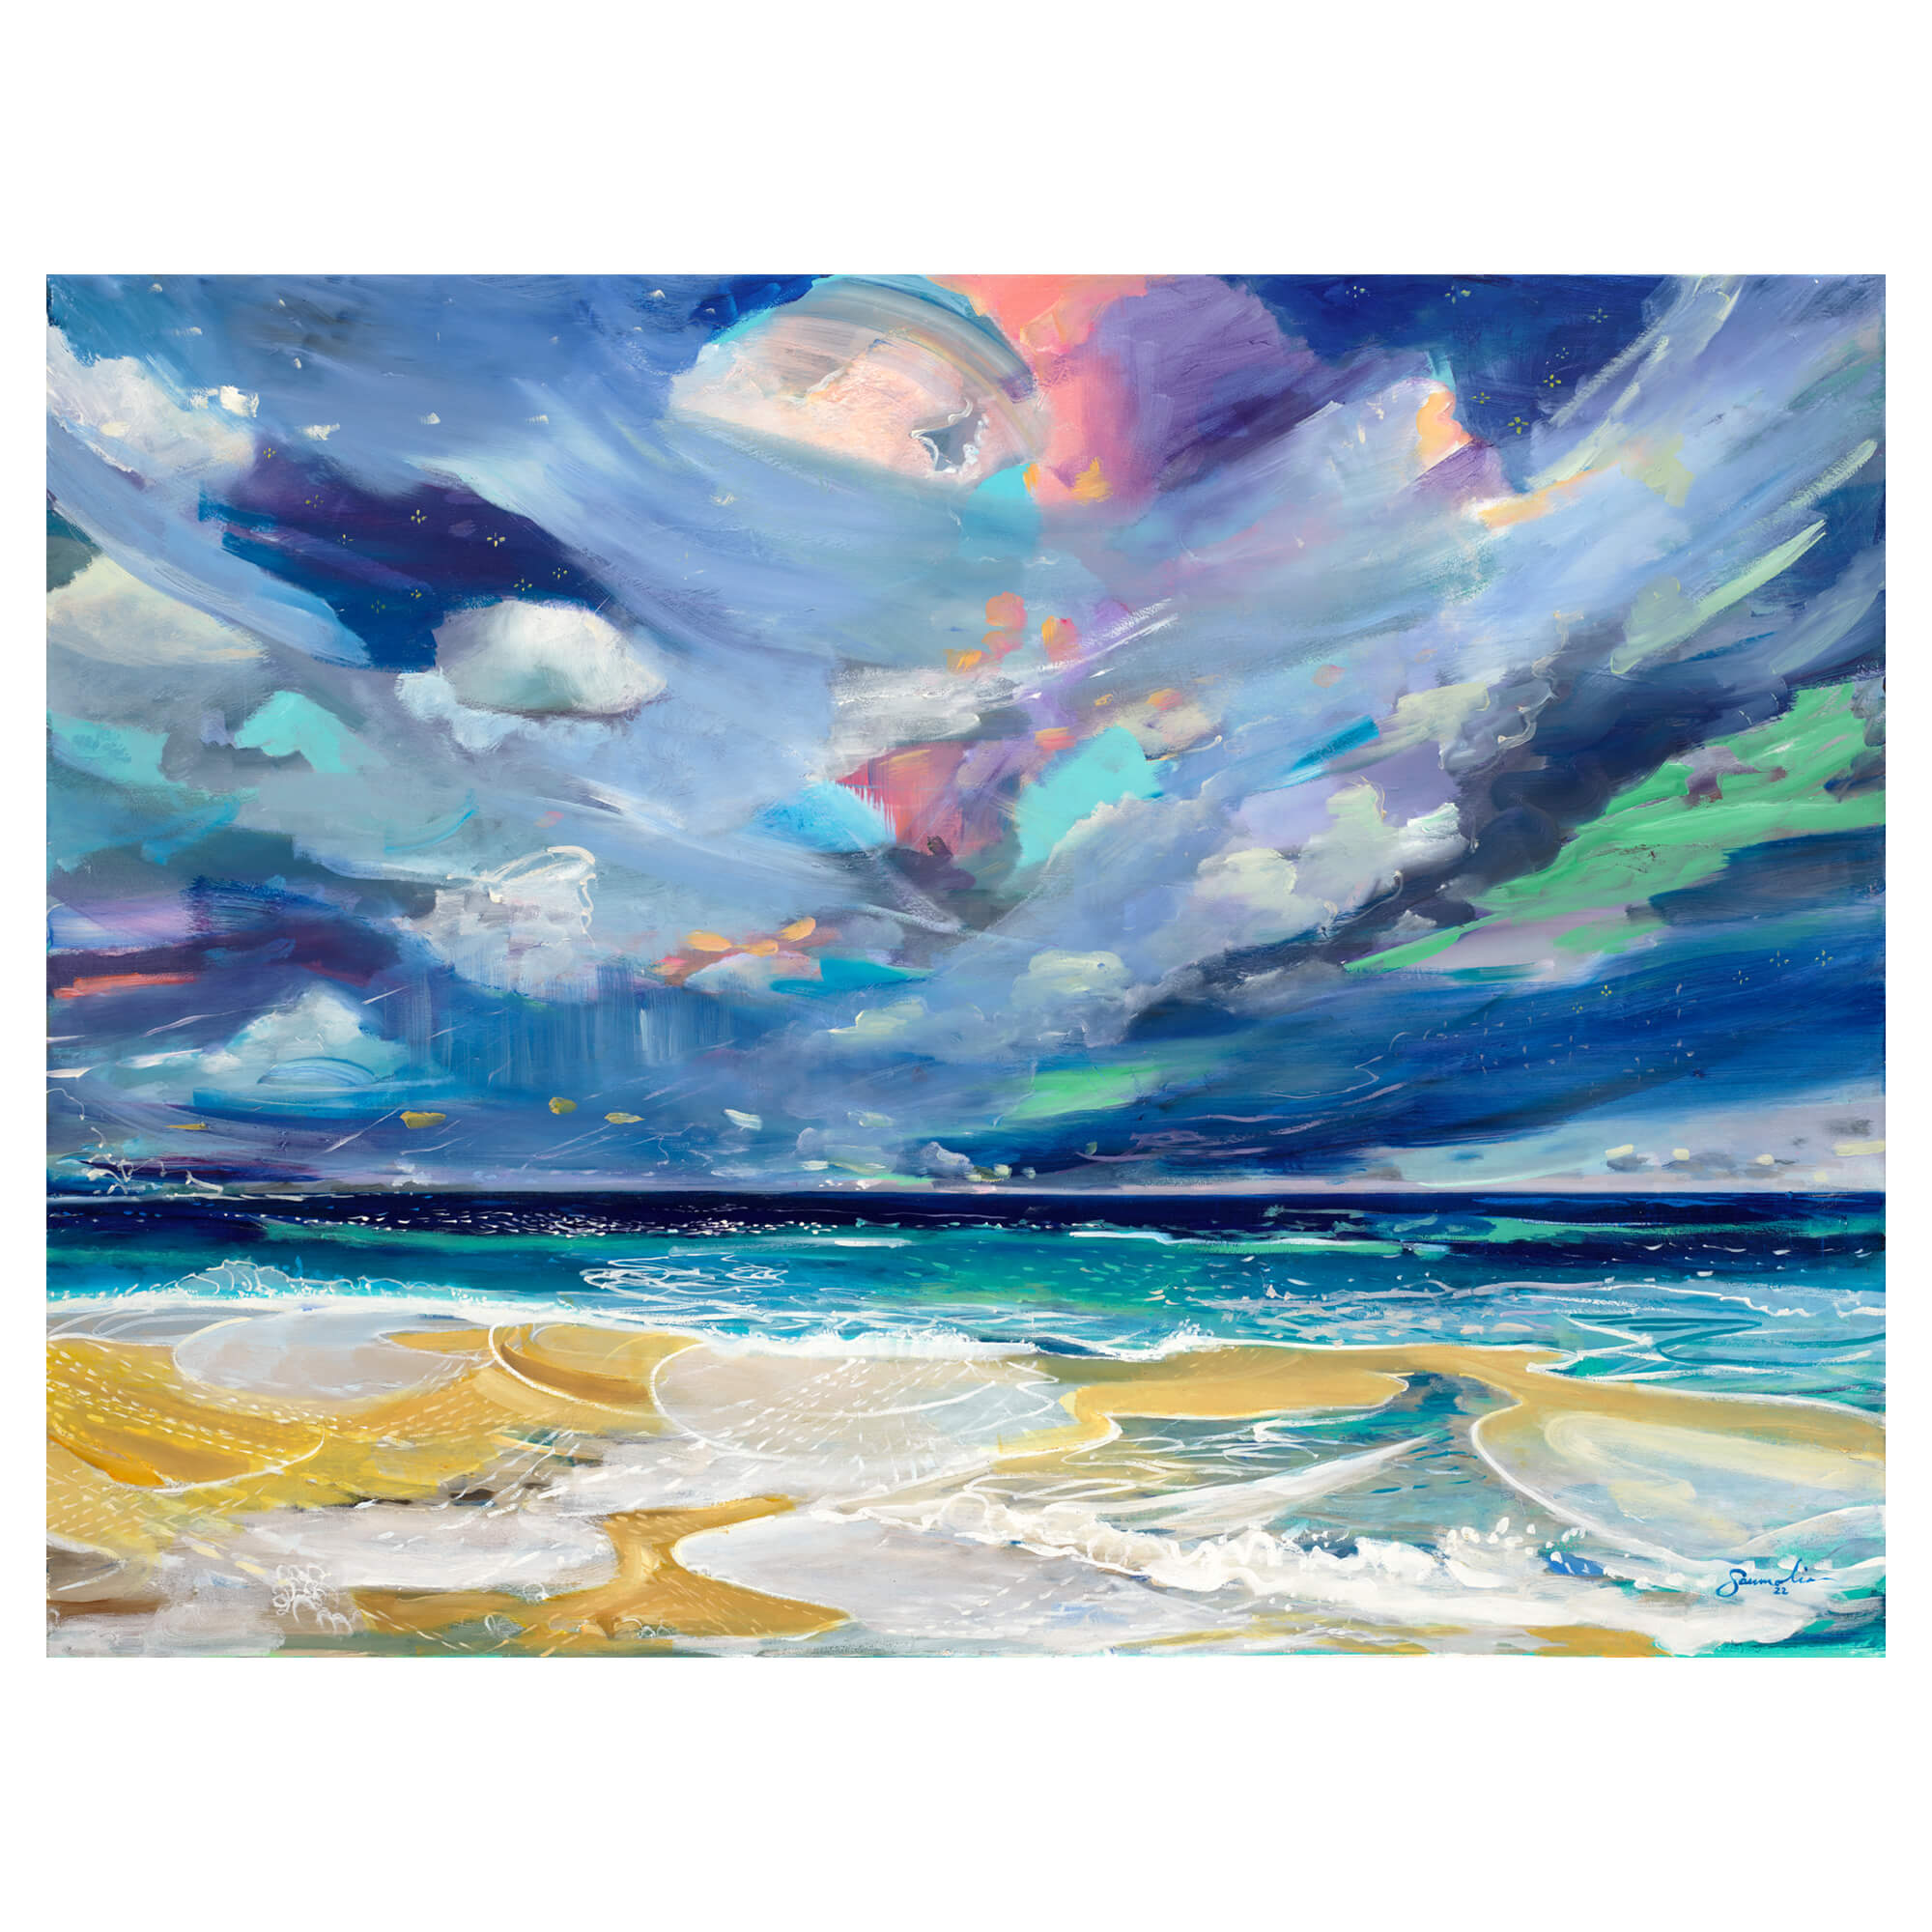 A canvas giclée art print featuring a colorful abstract ocean view by famed Hawaii artist Saumolia Puapuaga